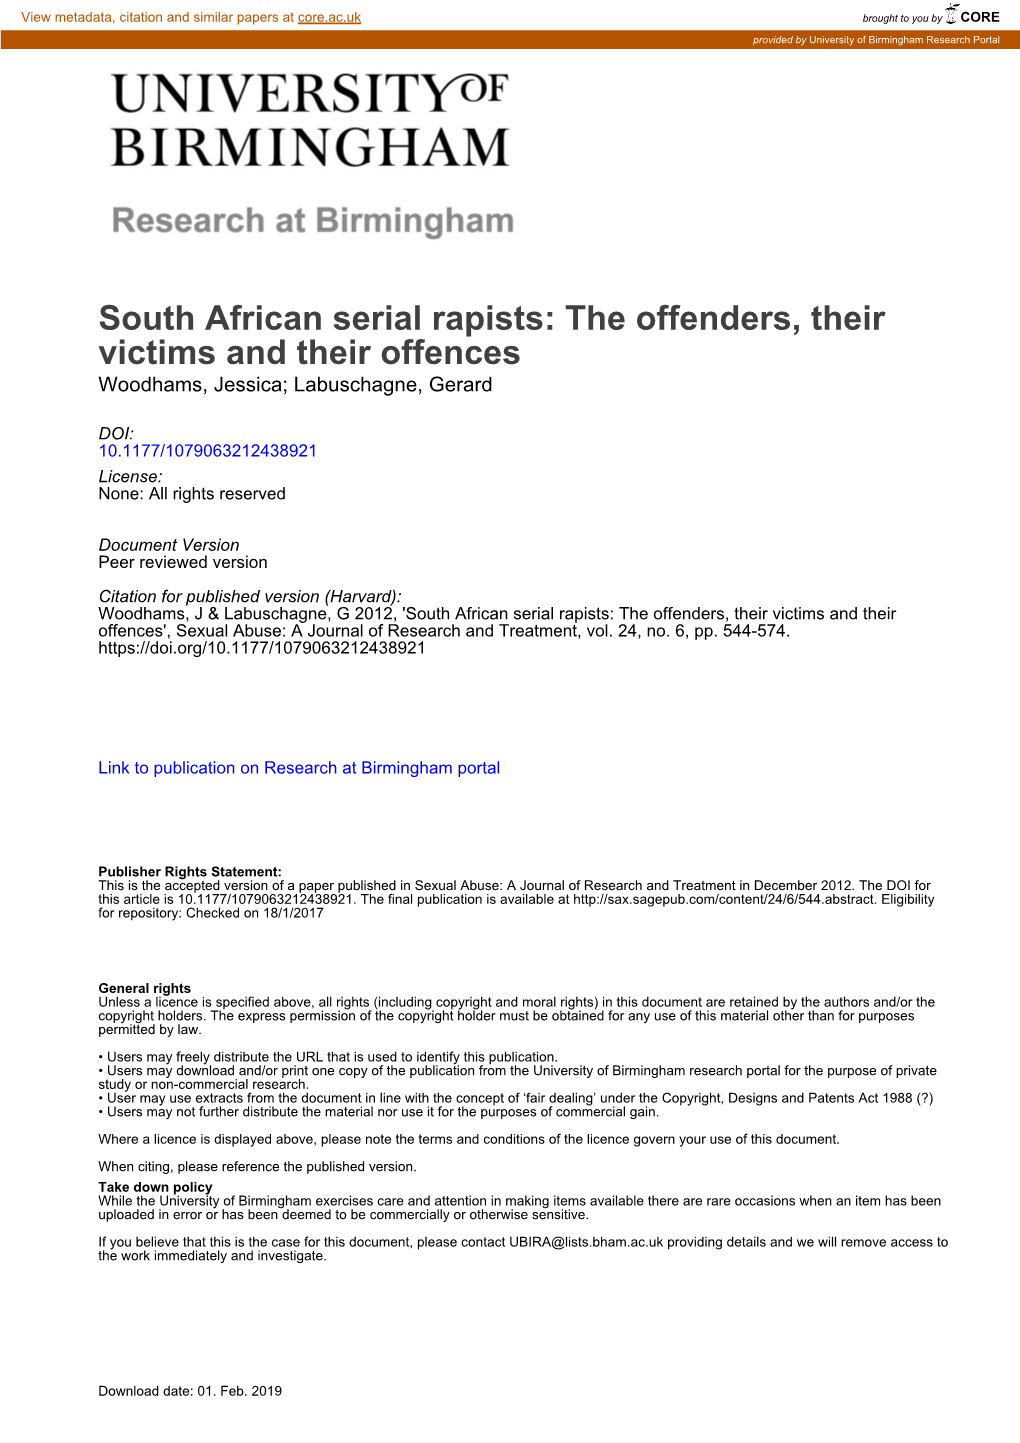 South African Serial Rapists: the Offenders, Their Victims and Their Offences Woodhams, Jessica; Labuschagne, Gerard